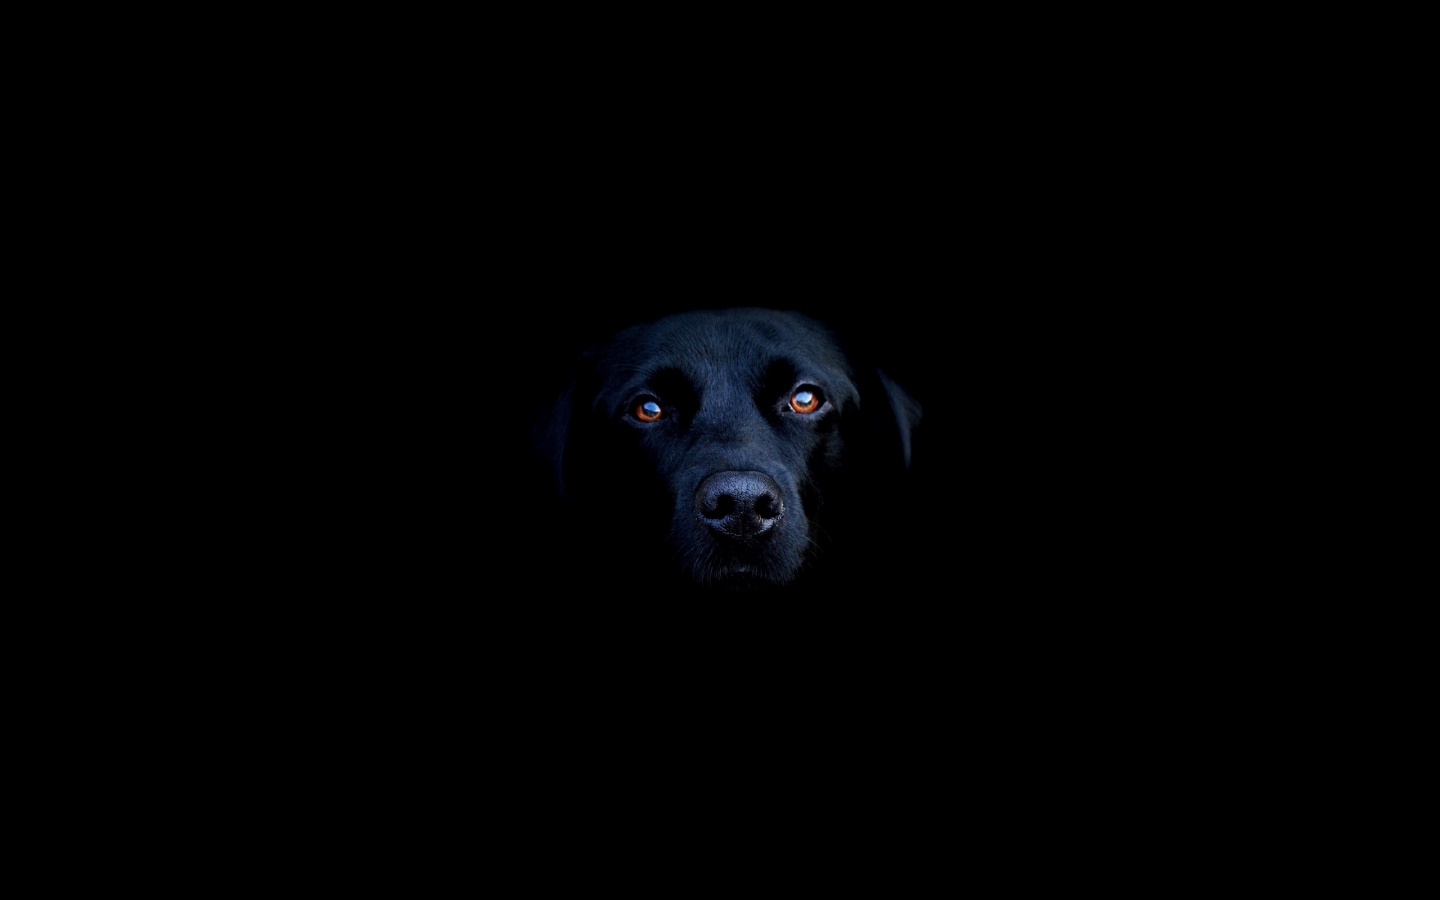 Black dog for 1440 x 900 widescreen resolution